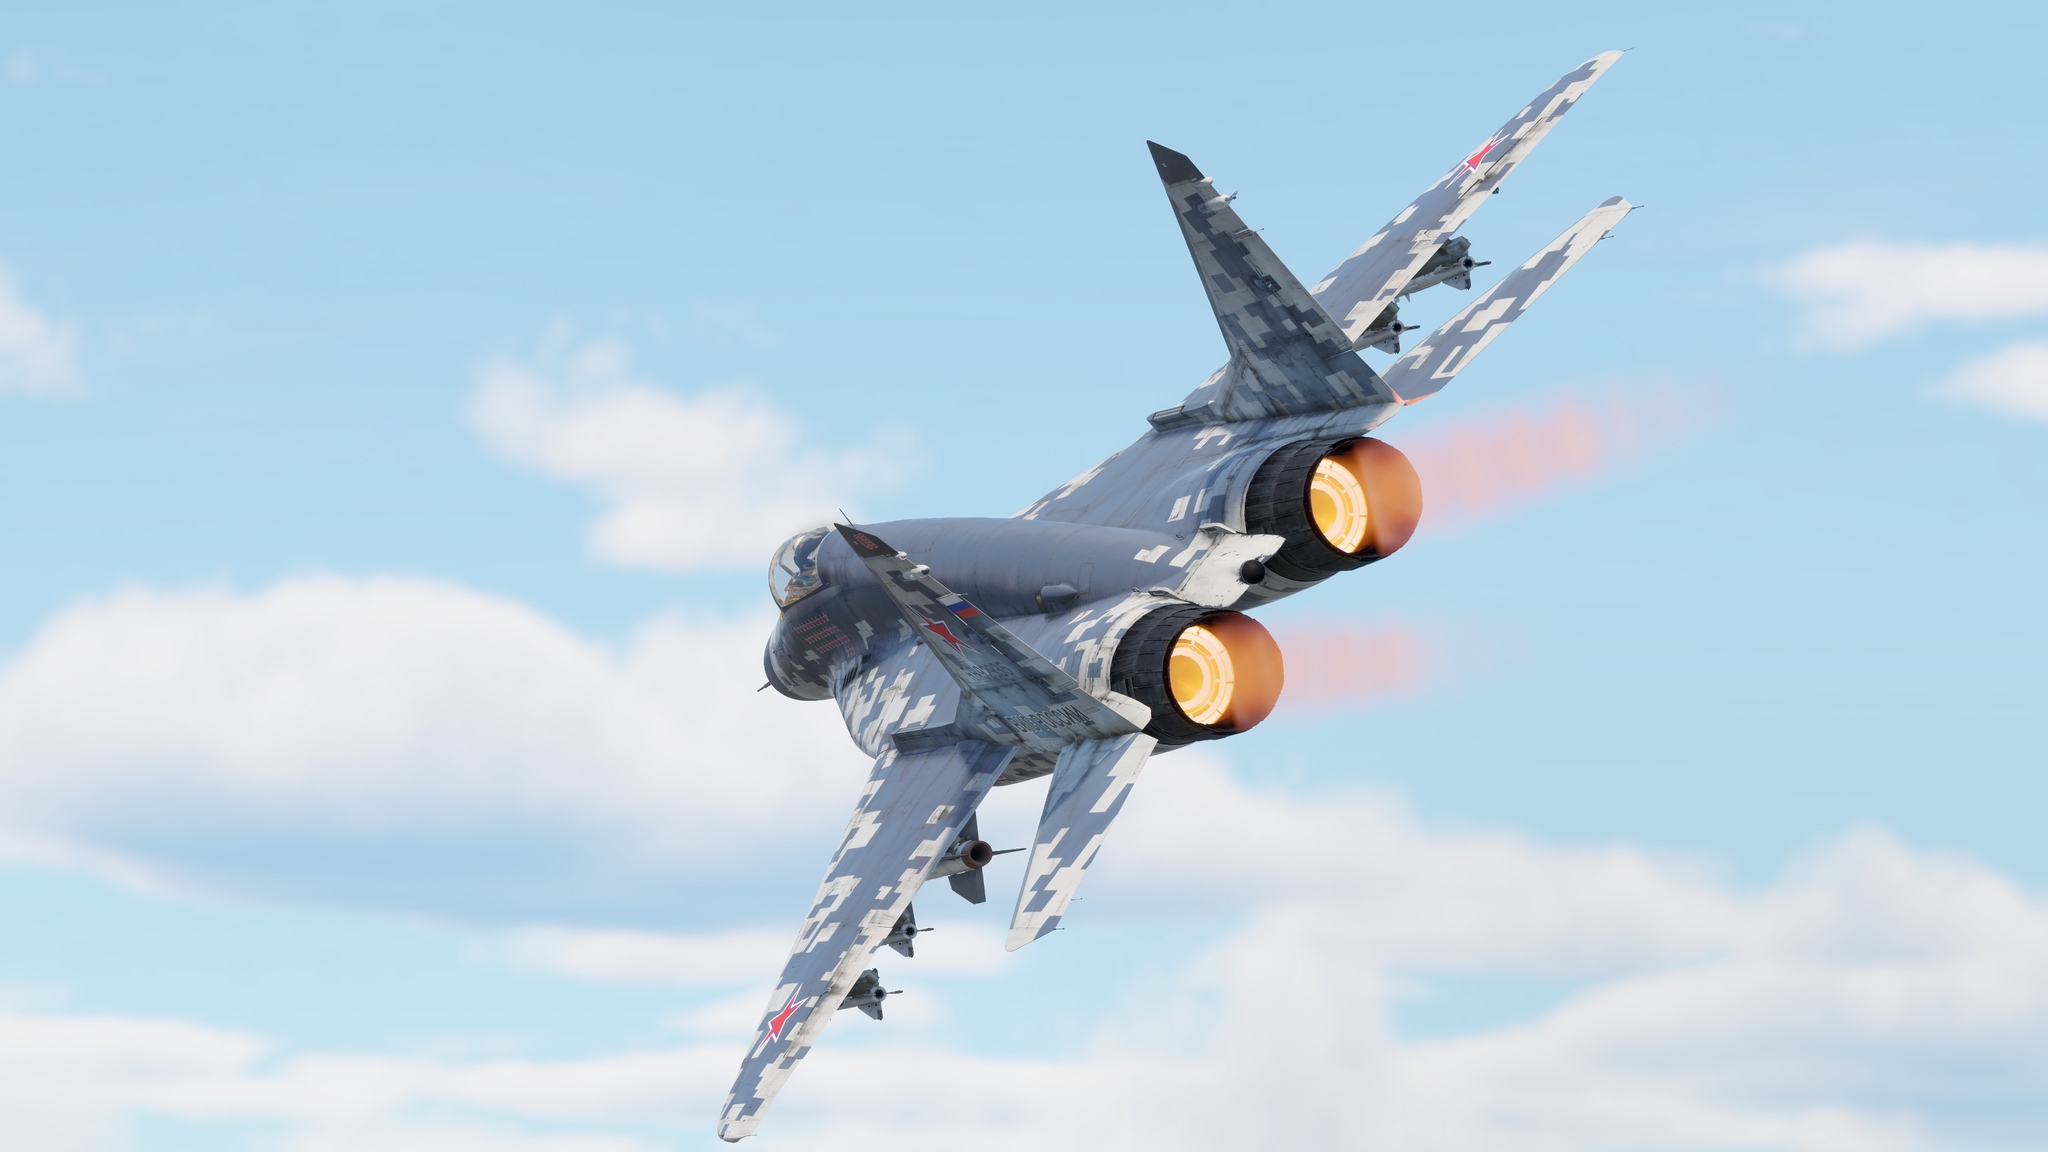 MiG-29 - My, Games, Video game, War thunder, Airplane, Aviation, Computer graphics, Graphics, Sunset, Landscape, Sky, Clouds, Flight, Jet, MiG-29